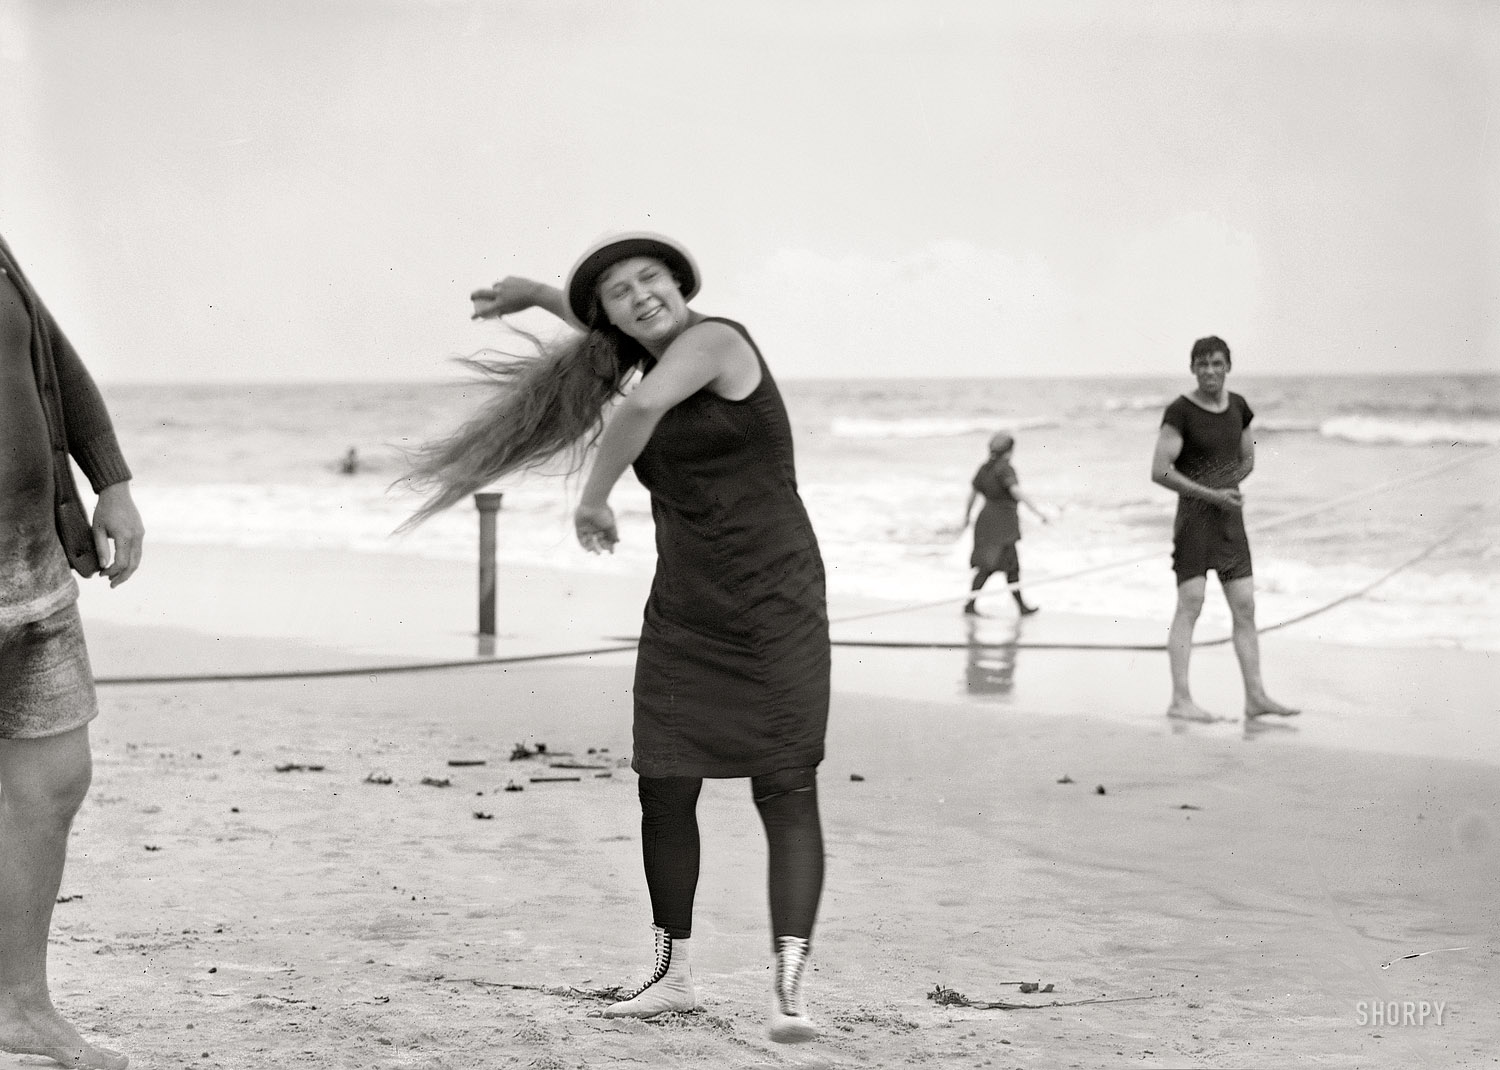 Long Beach, Long Island, N.Y., circa 1913. "Hazel Reiber." Who was evidently enough of a notable to have her picture taken (twice) by the Bain News Service. 5x7 glass negative, George Grantham Bain Collection. View full size.